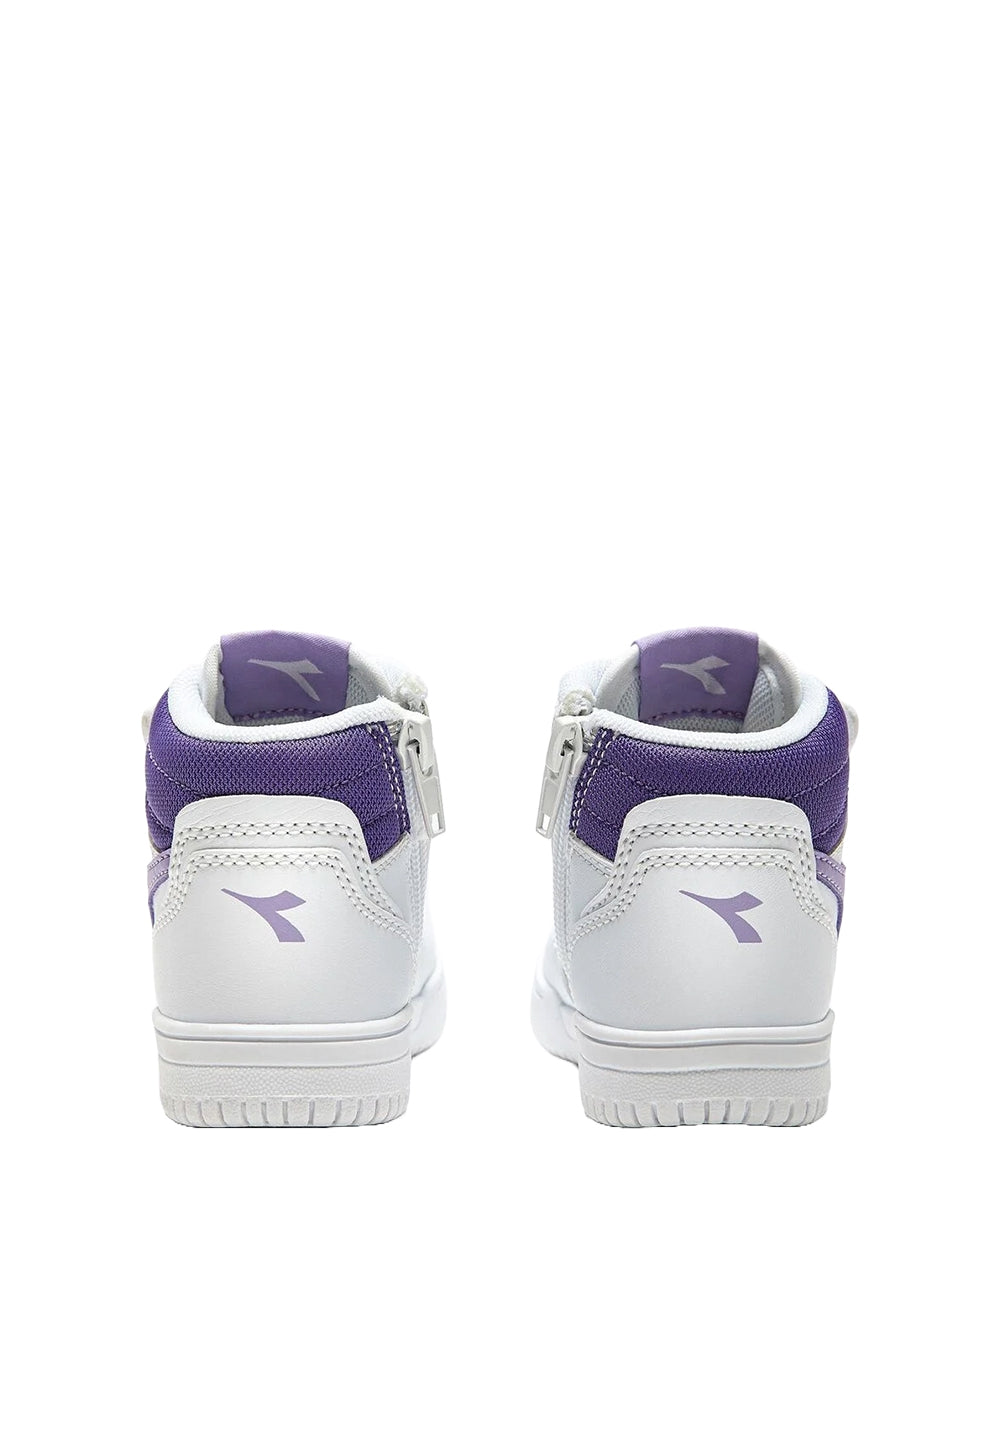 White-purple shoes for girls